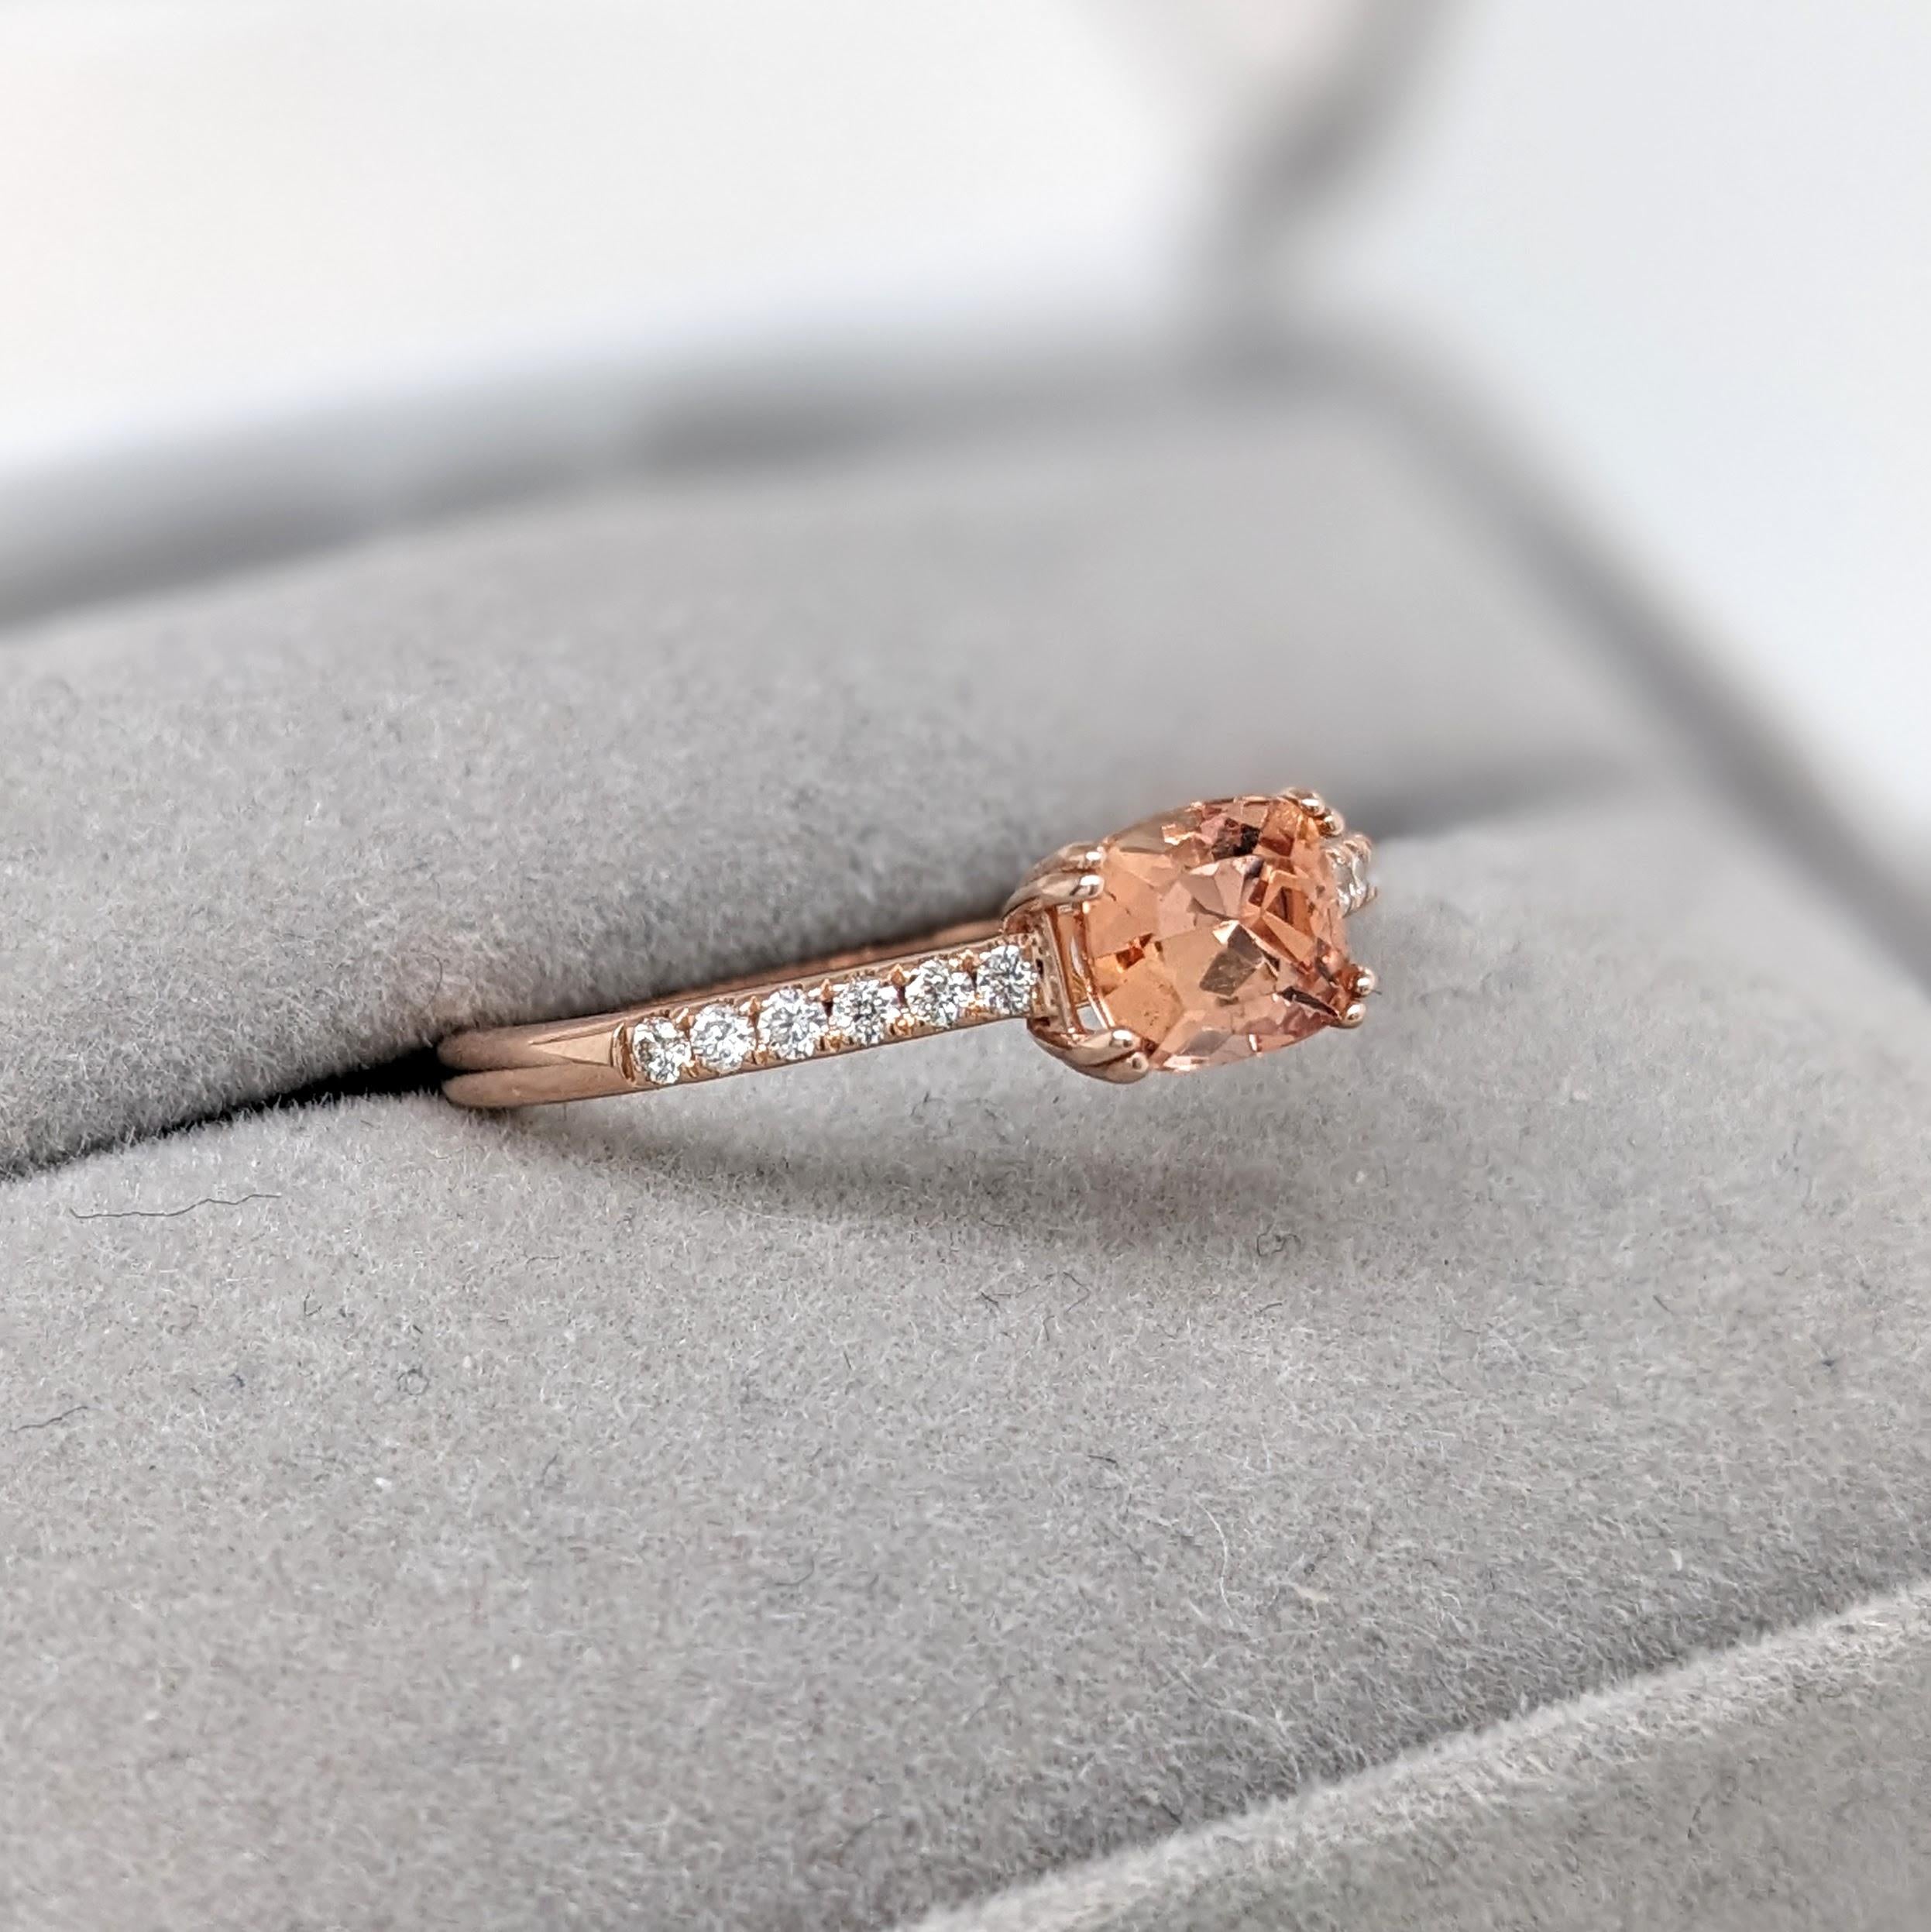 Imperial Topaz Ring w Natural Diamonds in Solid 14K Rose Gold EM 4x6mm